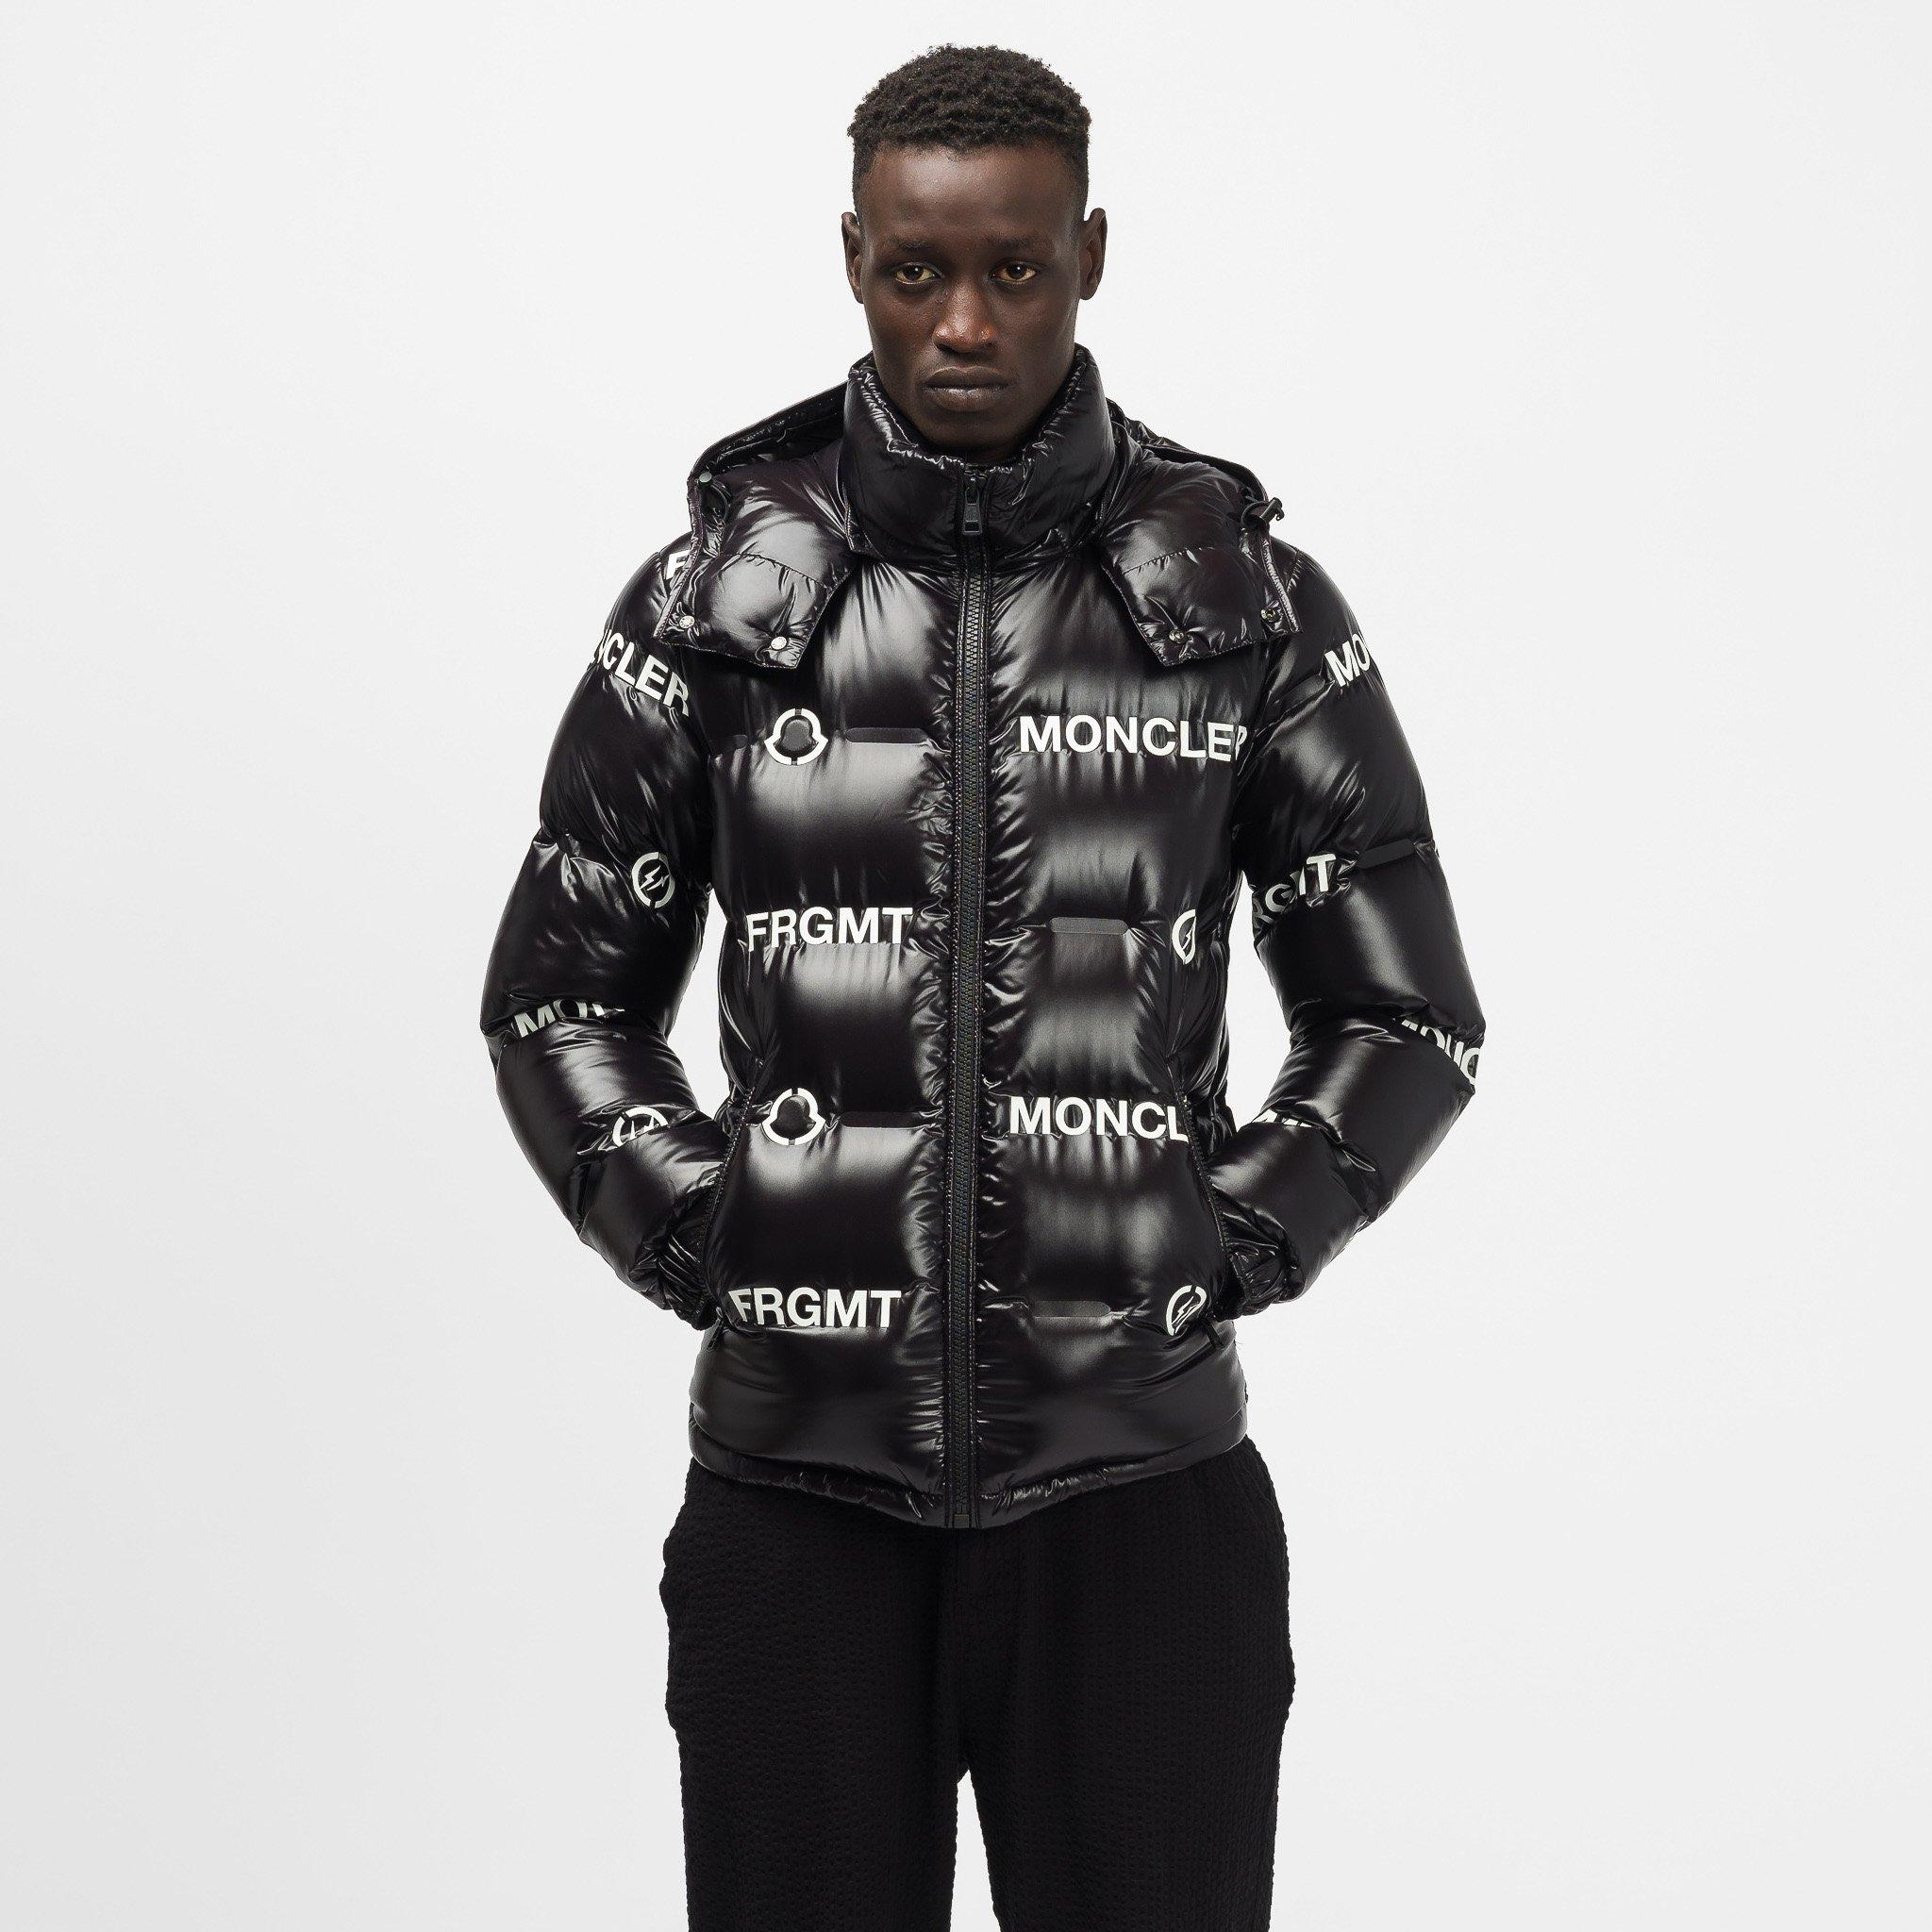 Moncler Genius Synthetic Fragment Mayconne Bomber in Black for Men - Lyst